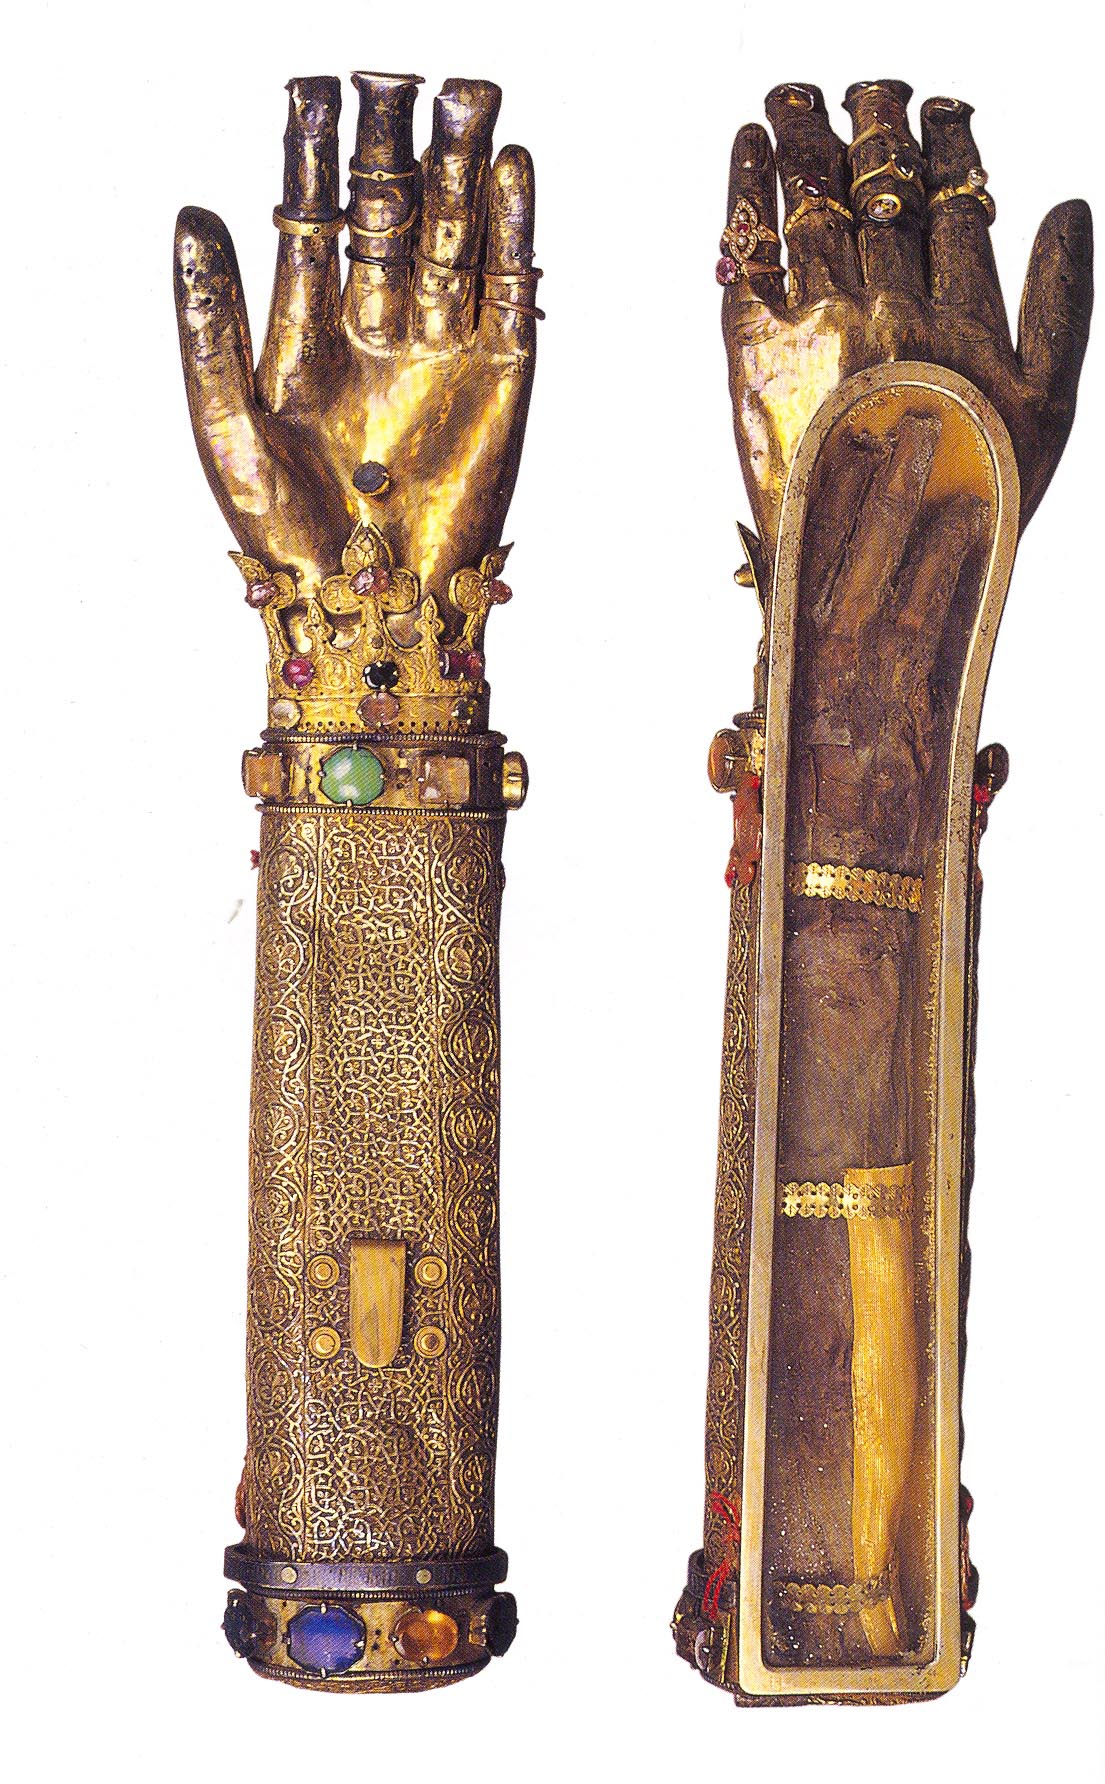 Reliquary of St. Anna's Arm